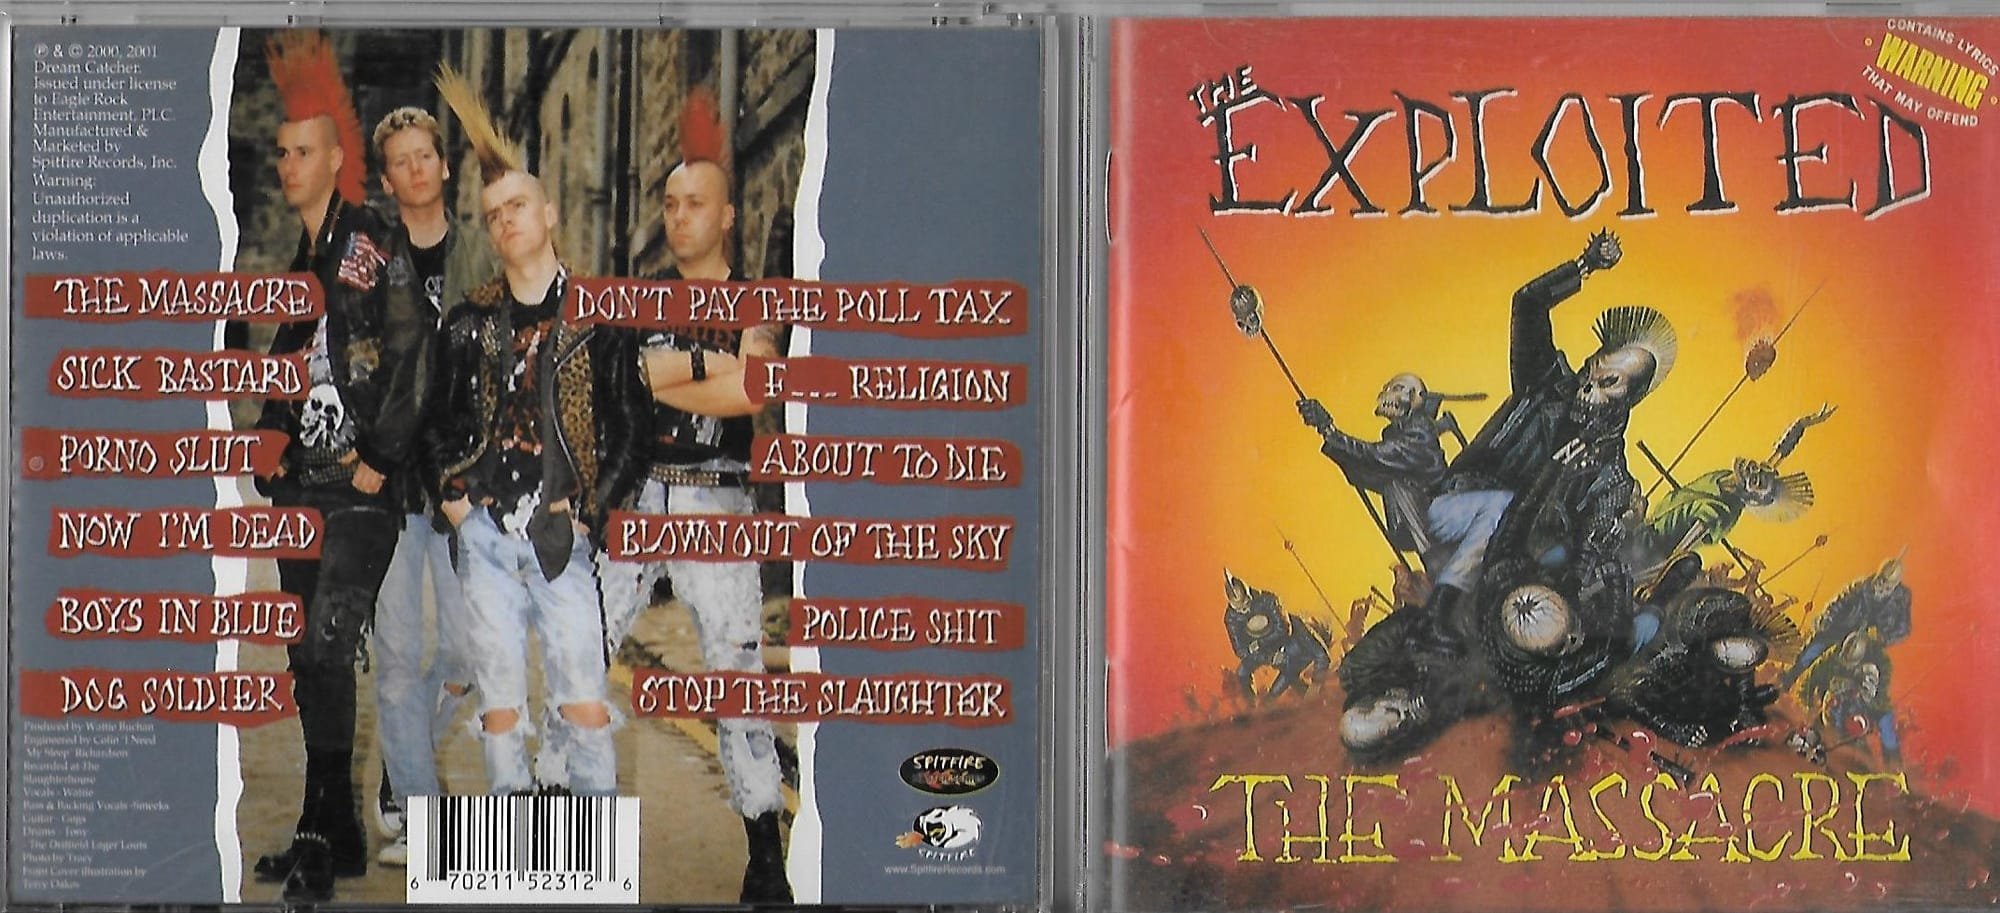 The Exploited – Computers Don't Blunder Lyrics